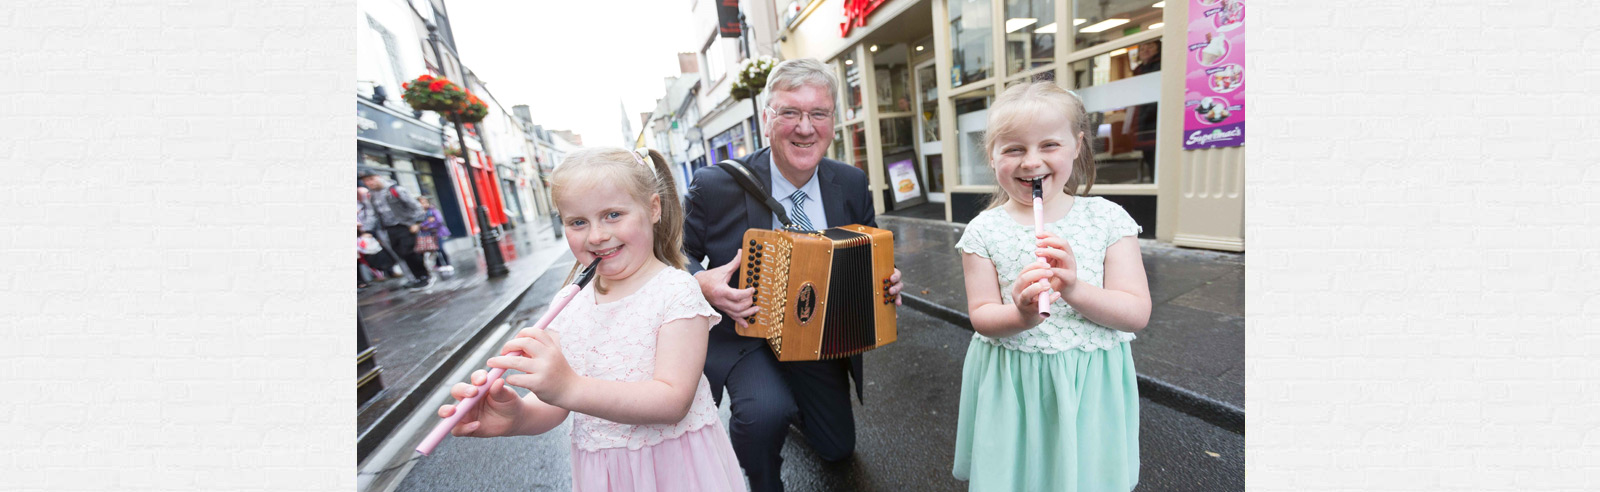 Supermac’s to sponsor the Fleadh Cheoil in Ennis